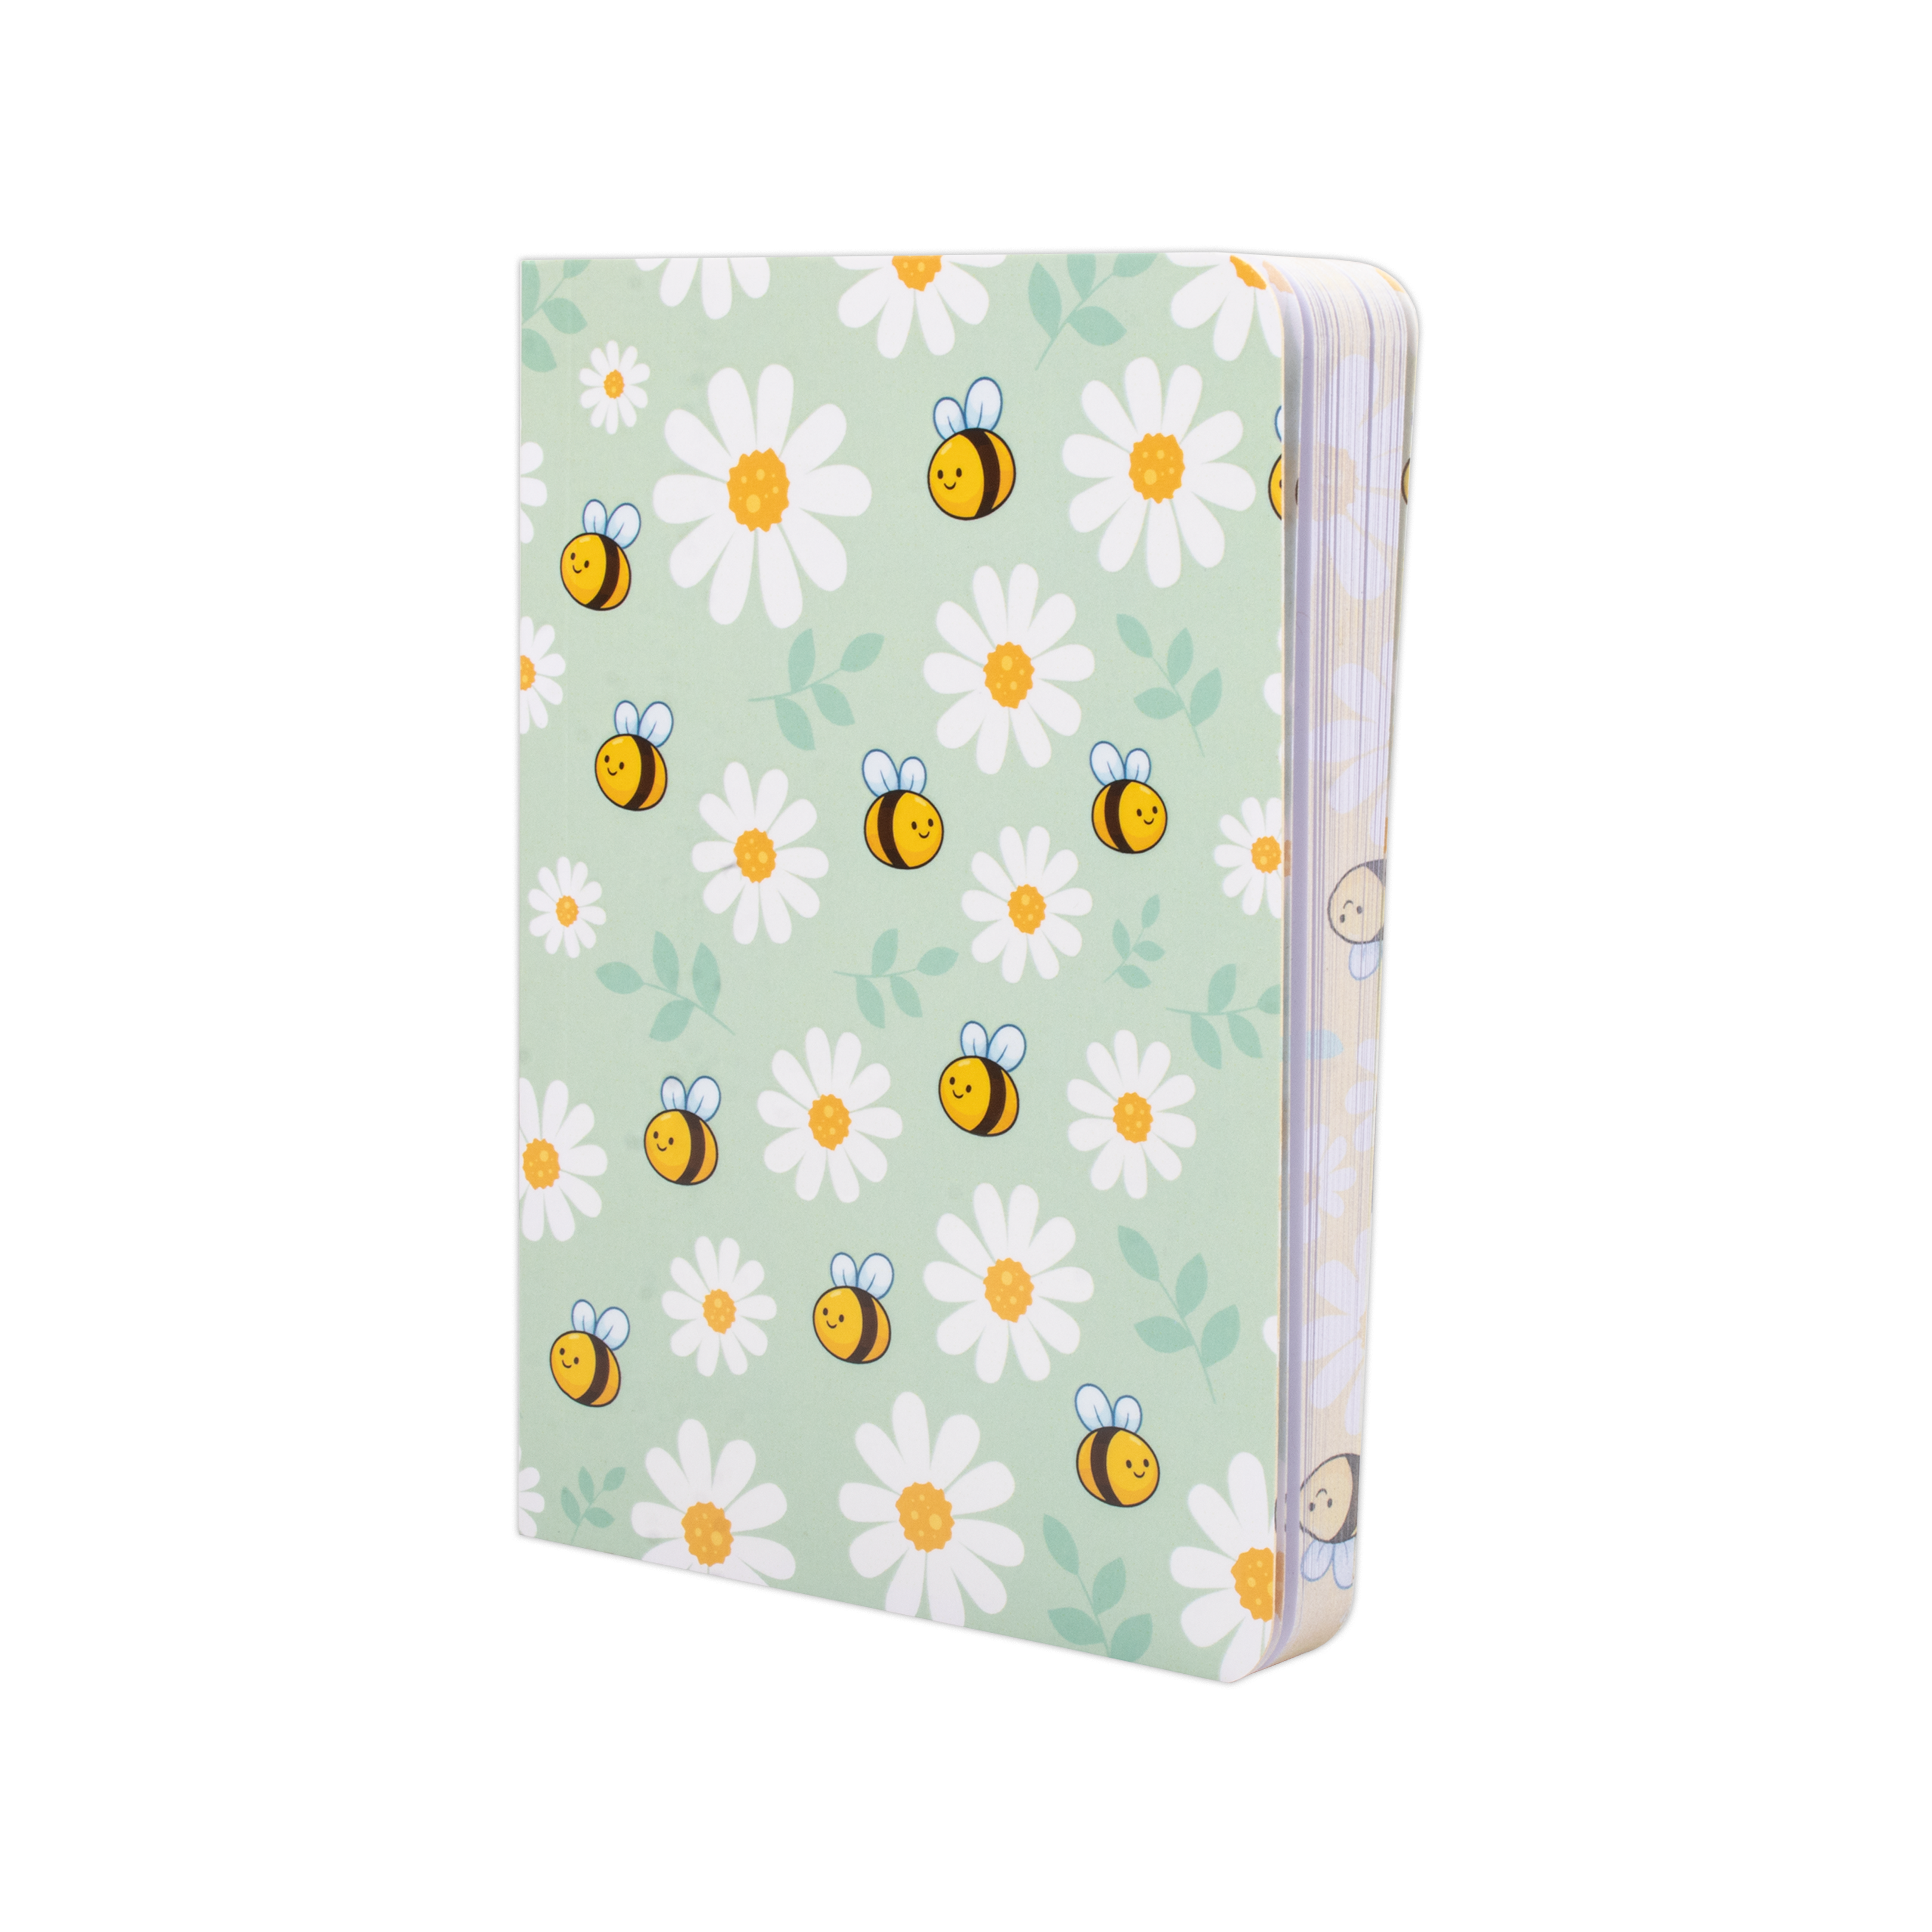 Softbound Ruled Notebook Flowers & Bees Edge Printed A6 128pages 100gsm